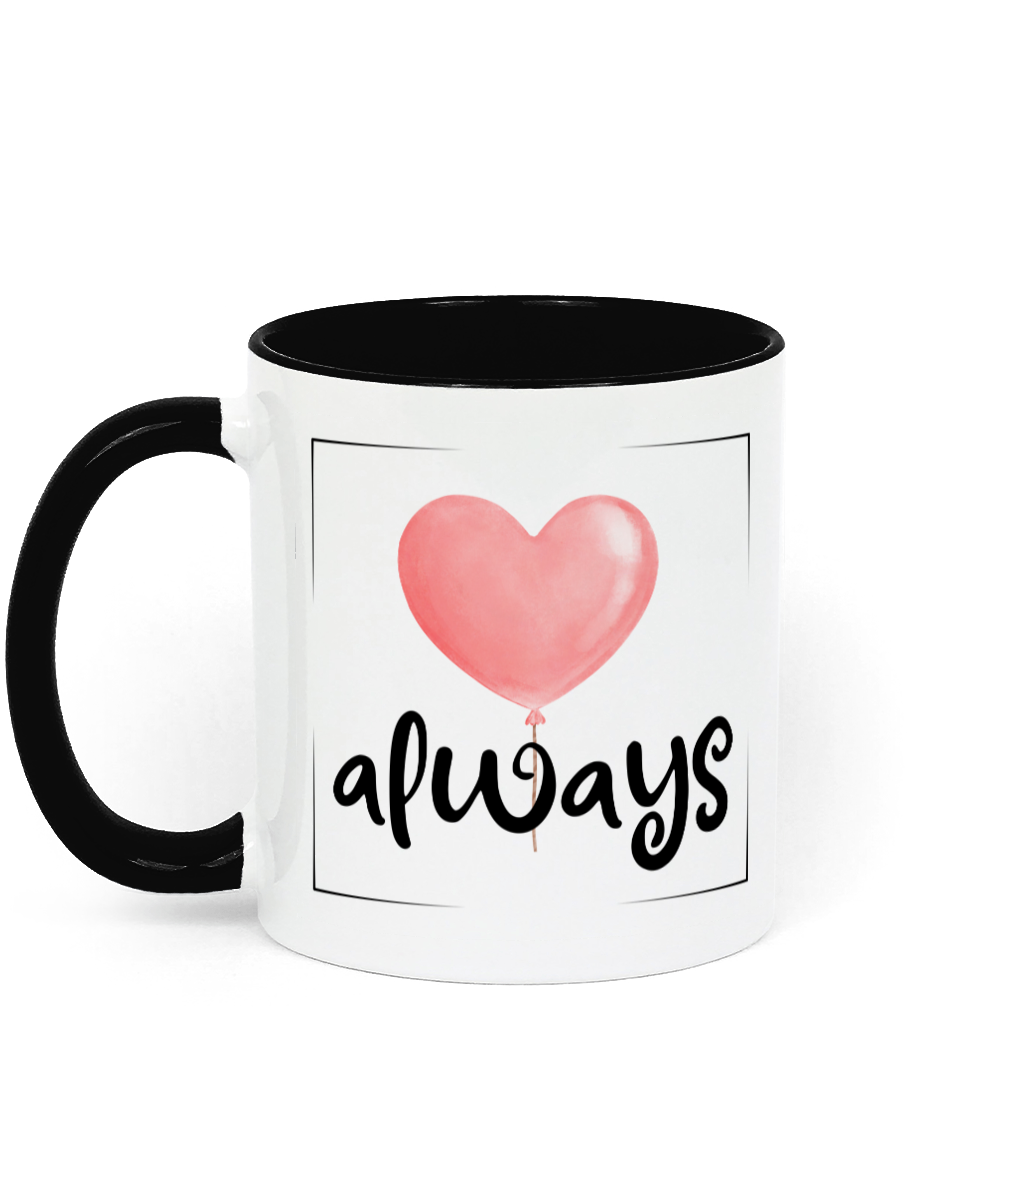 Love Always. .11 oz mug. Love. Thoughtfulness.Daily Affirmations, Motivation, Inspiration. Perfect Gift. Two-Toned. Black.